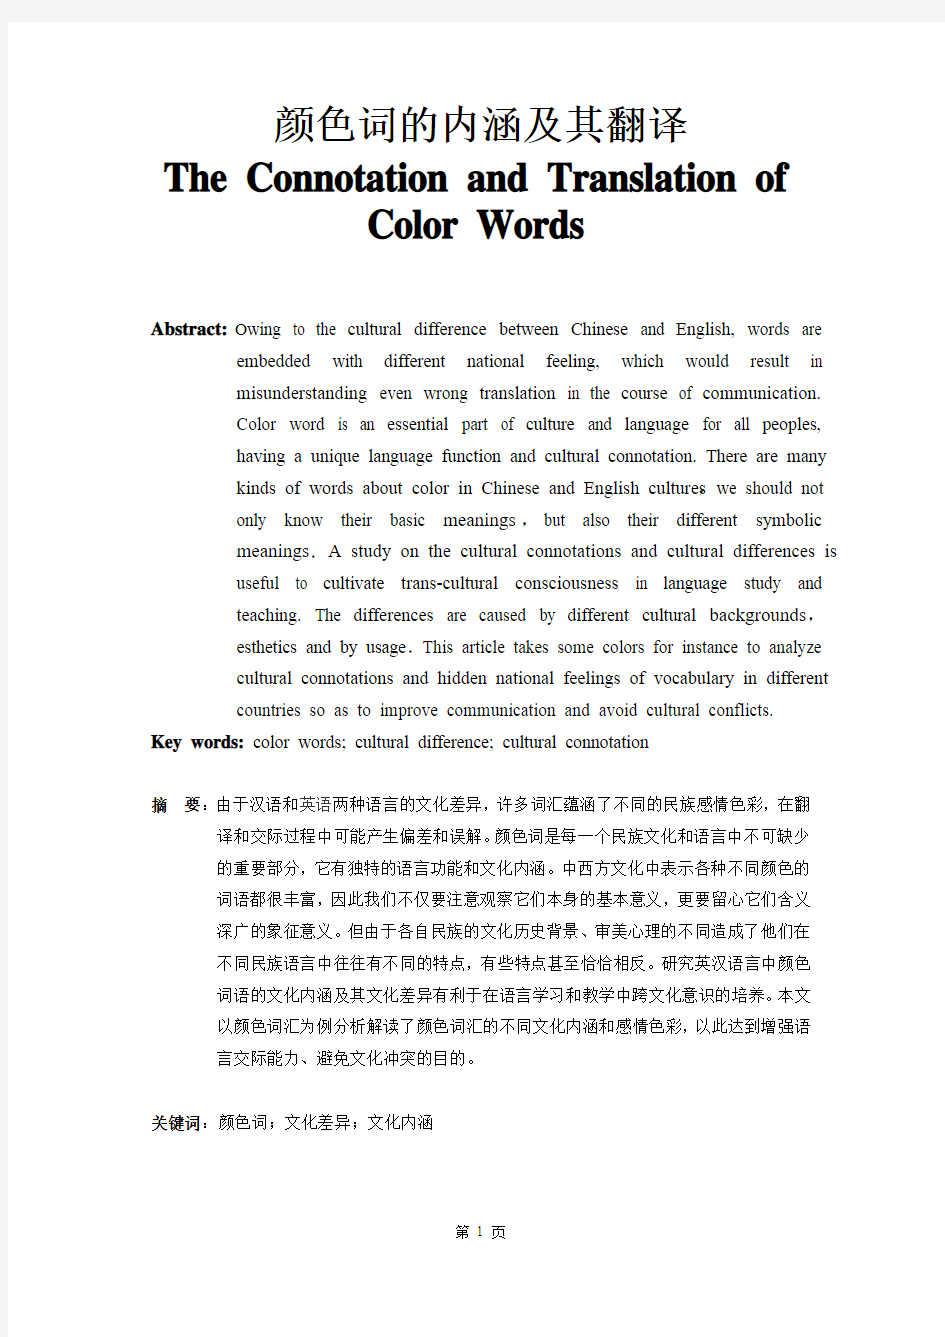 The Connotation and Translation of Color Words